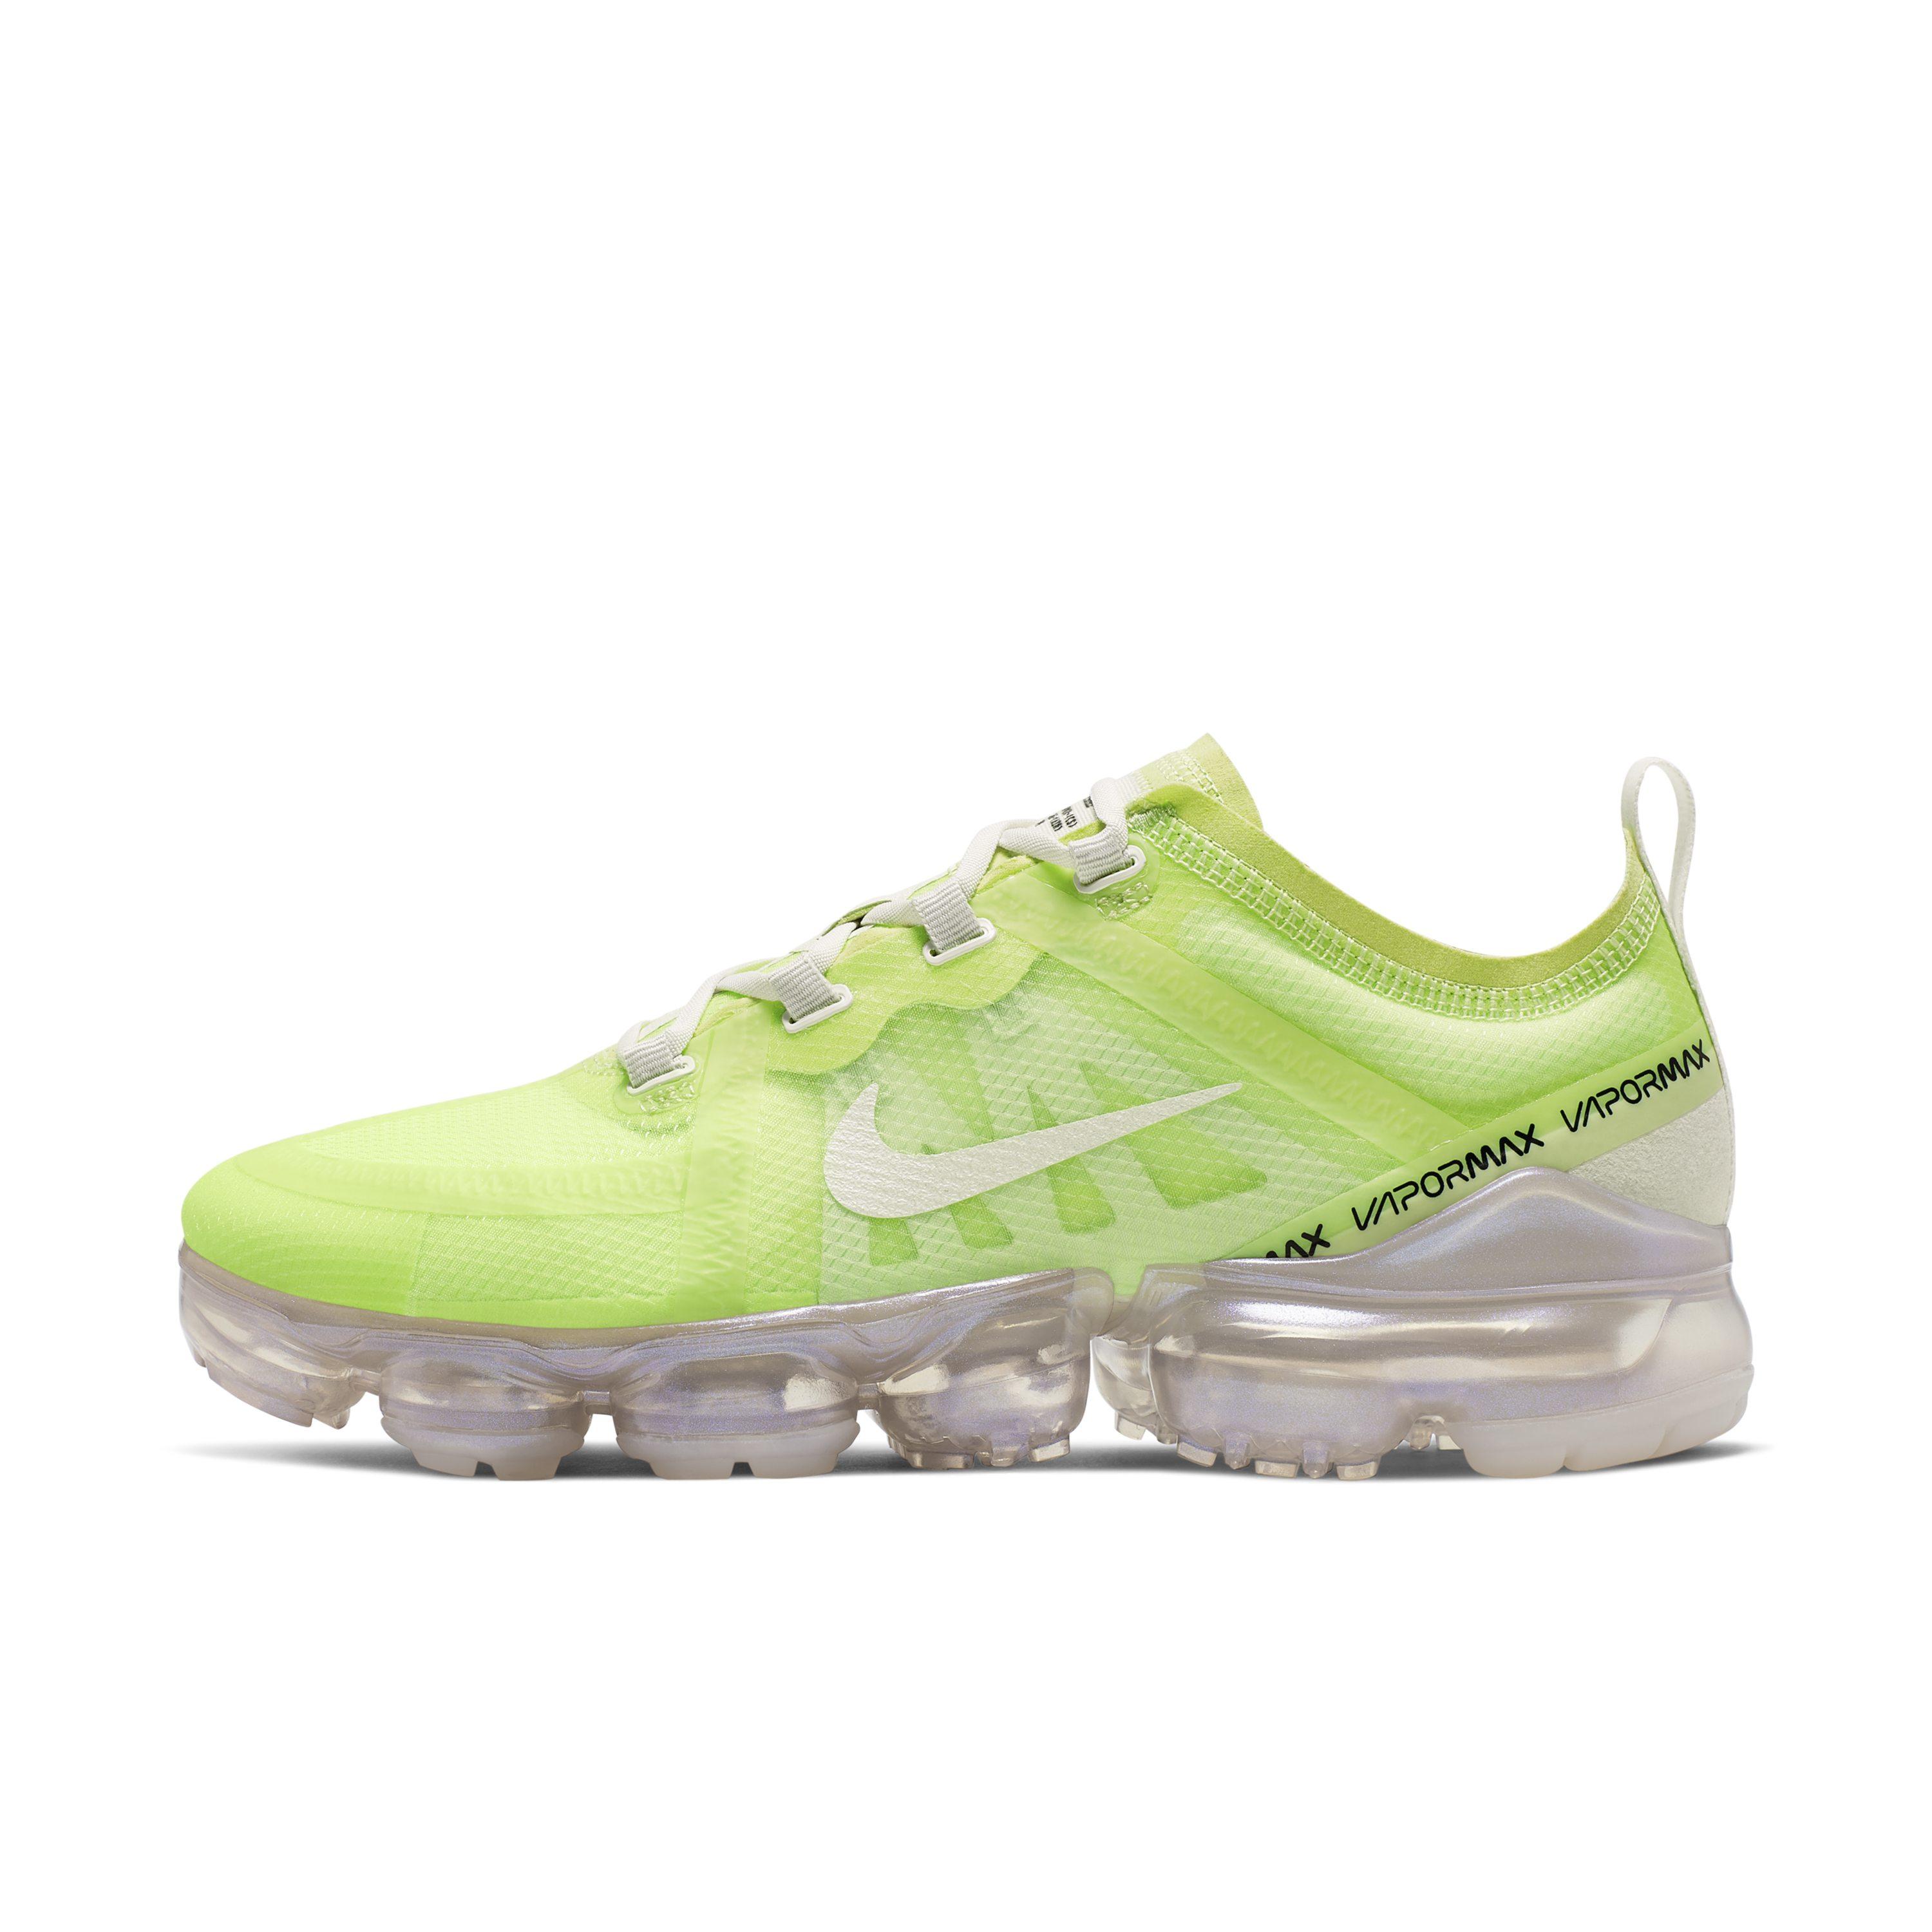 Nike Rubber Air Vapormax Se Mesh And Pvc Sneakers in Green - Lyst